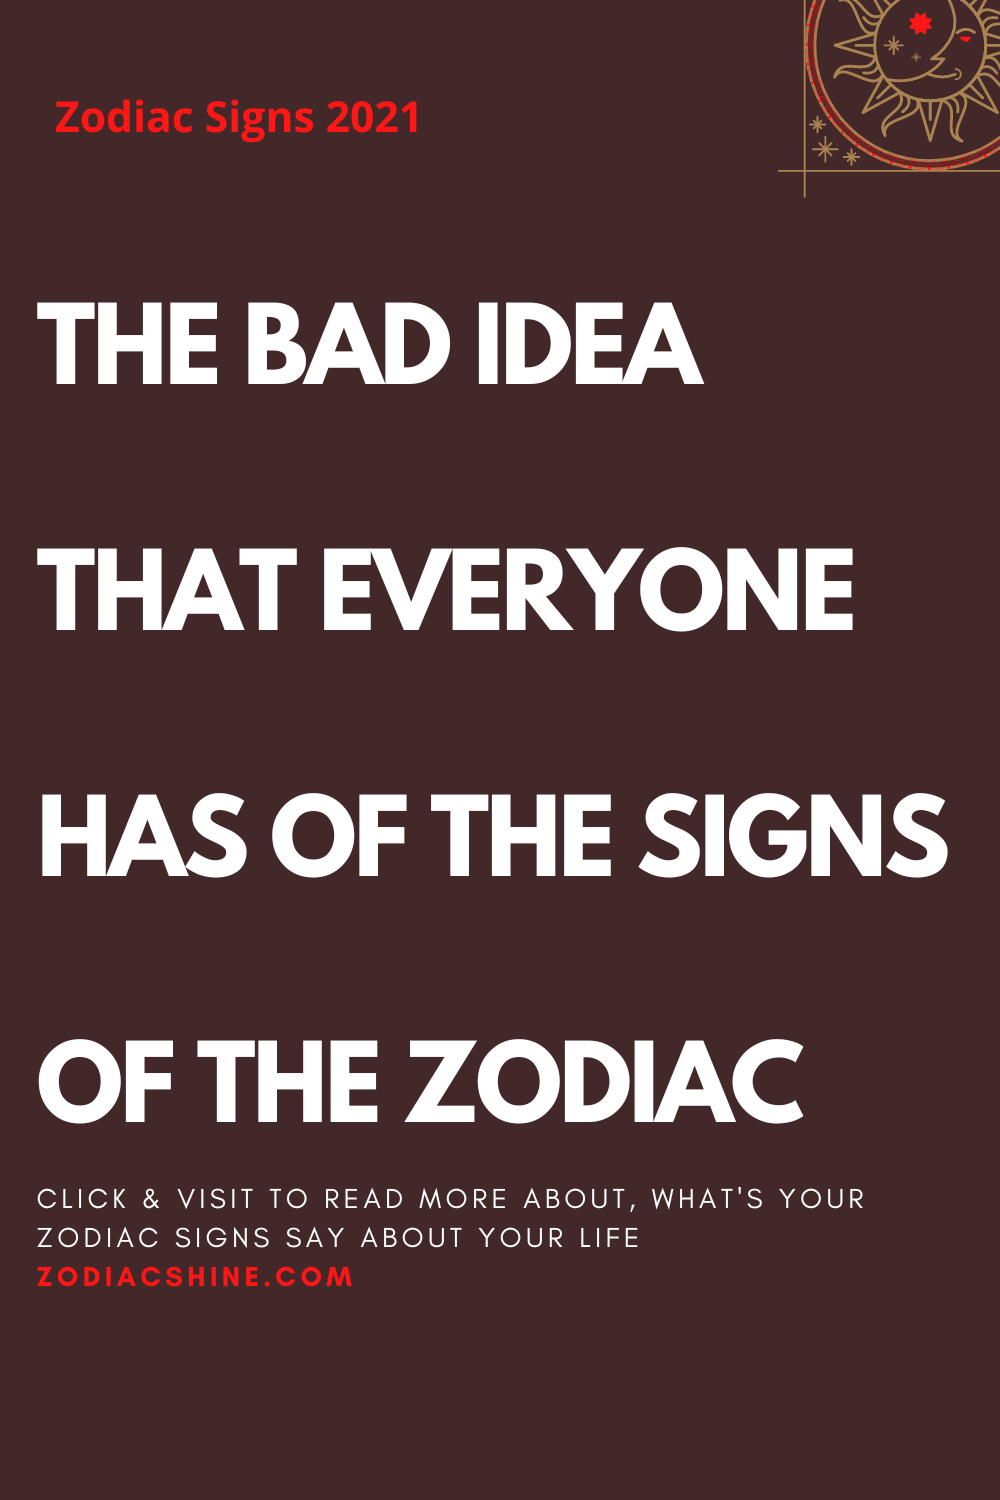 THE BAD IDEA THAT EVERYONE HAS OF THE SIGNS OF THE ZODIAC